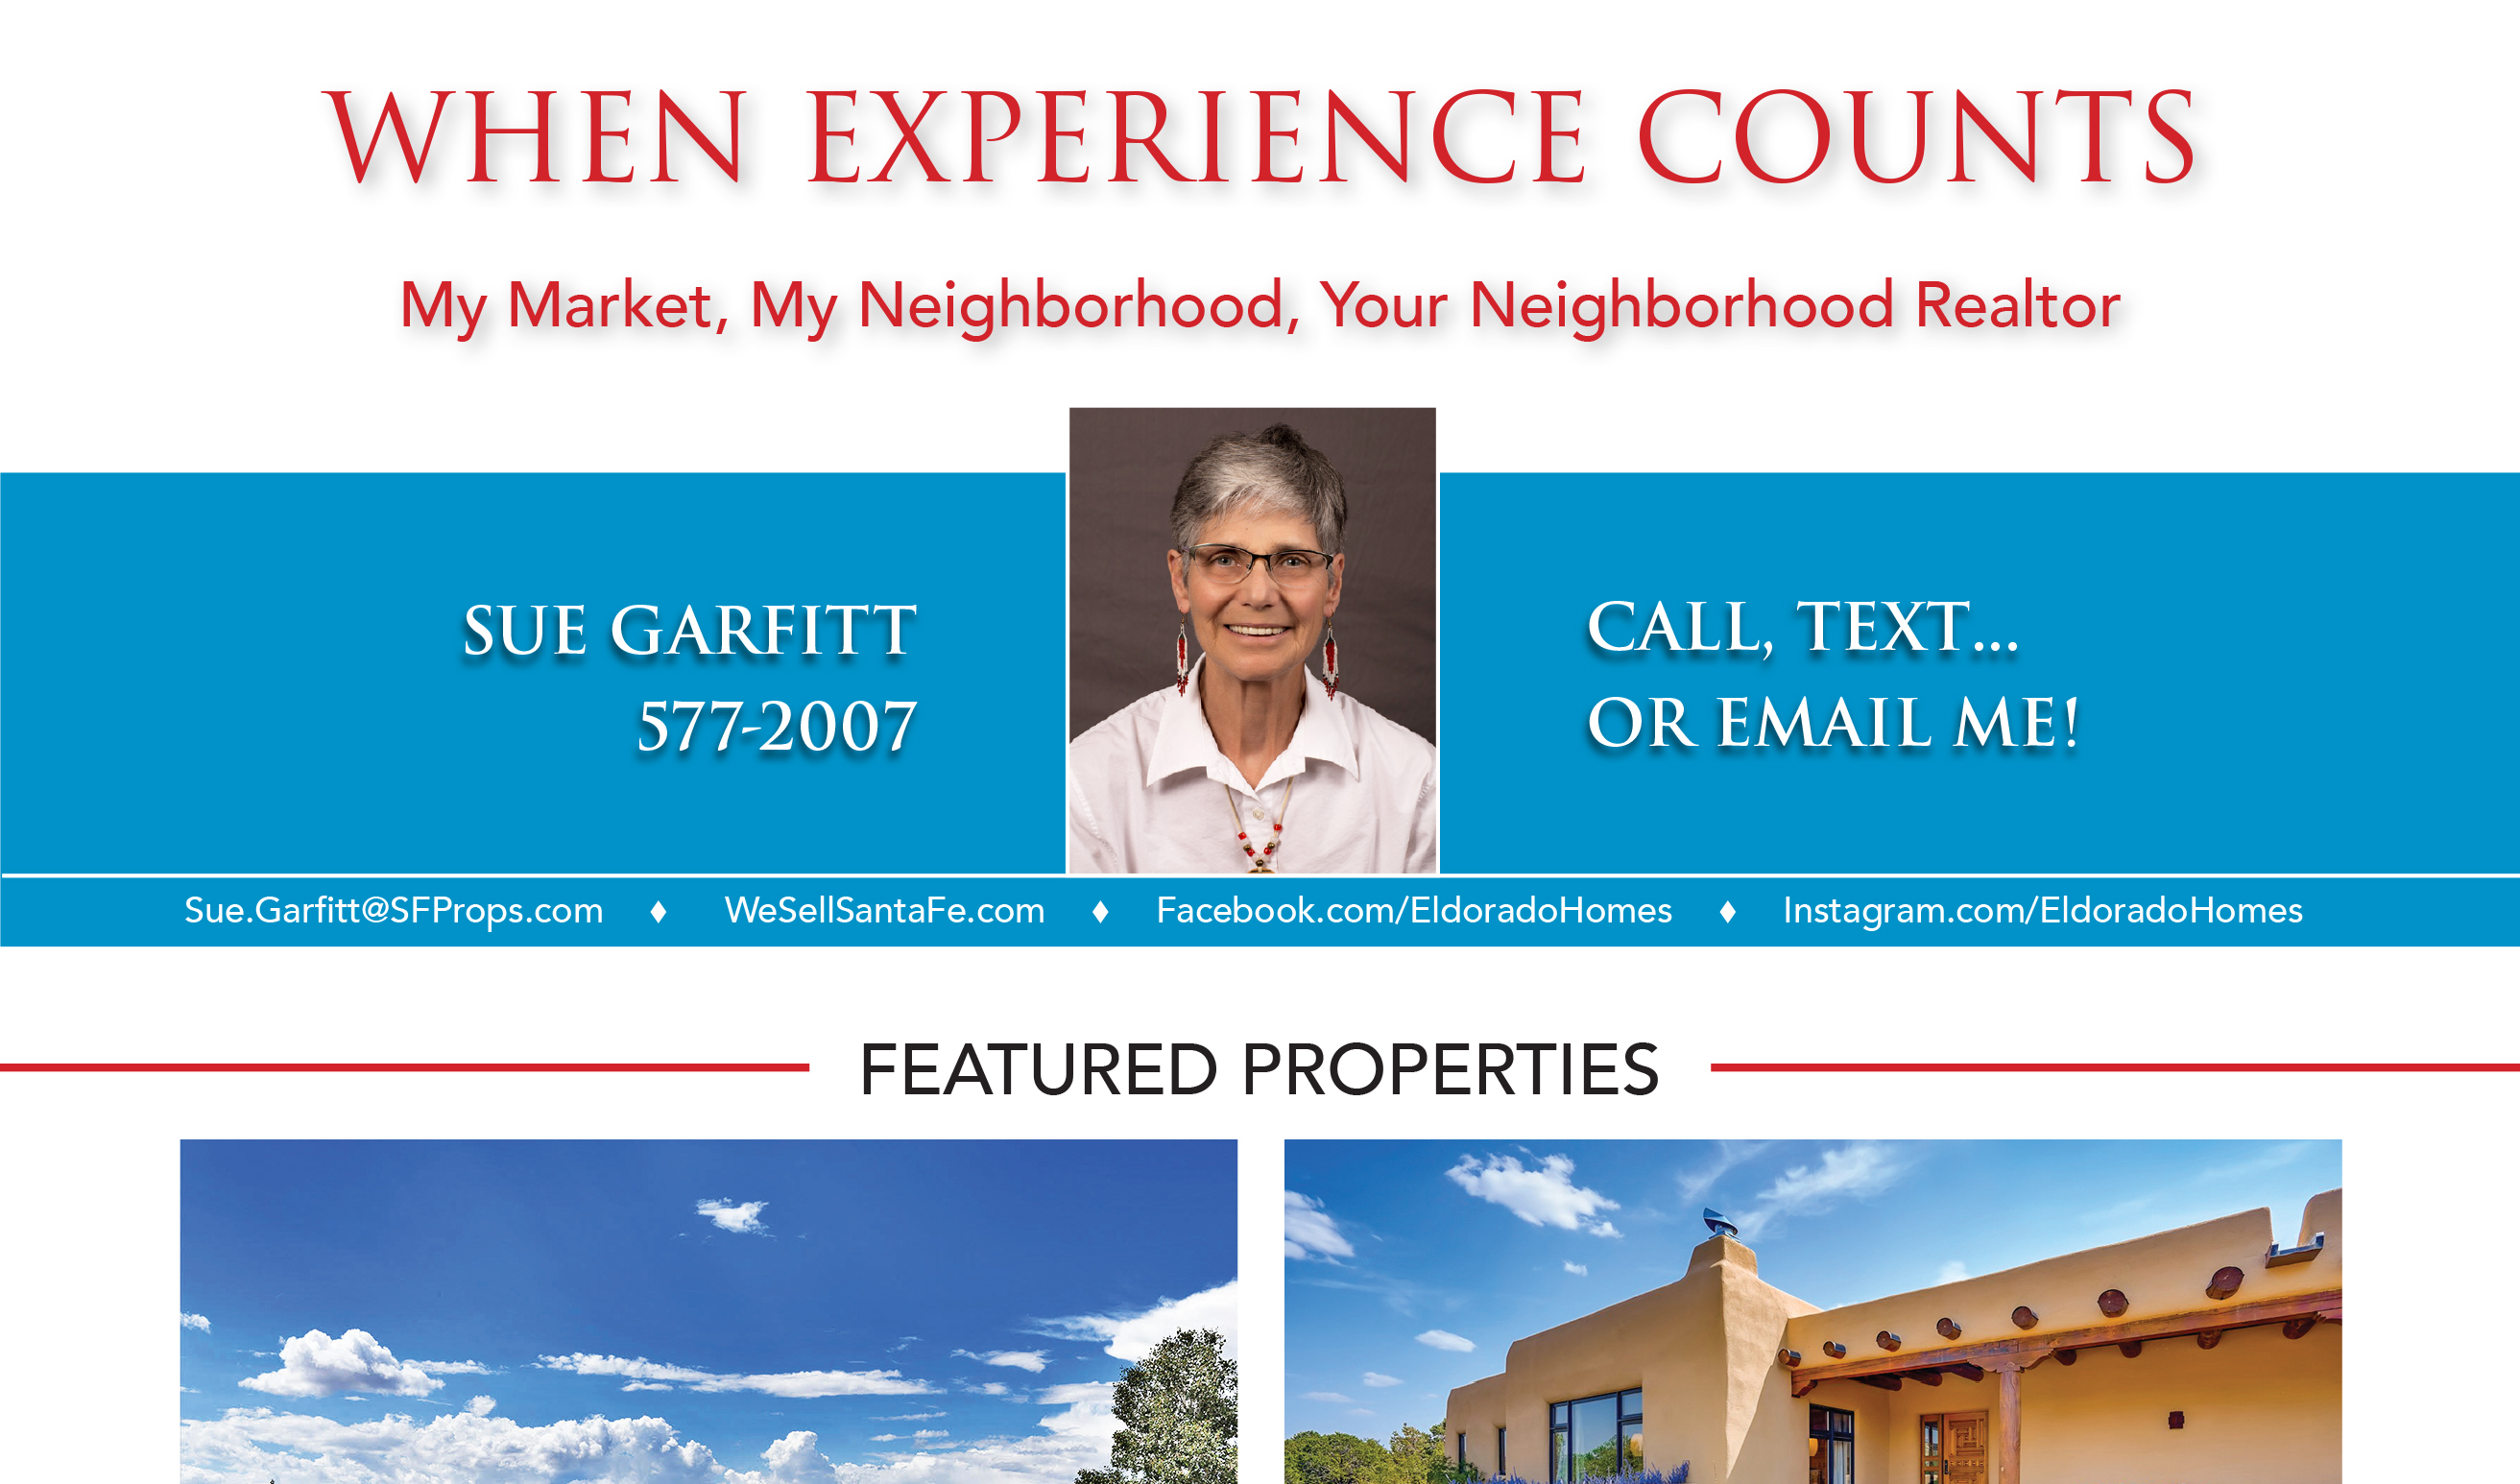 Did you see my ad in the September issue of Eldorado Living? 